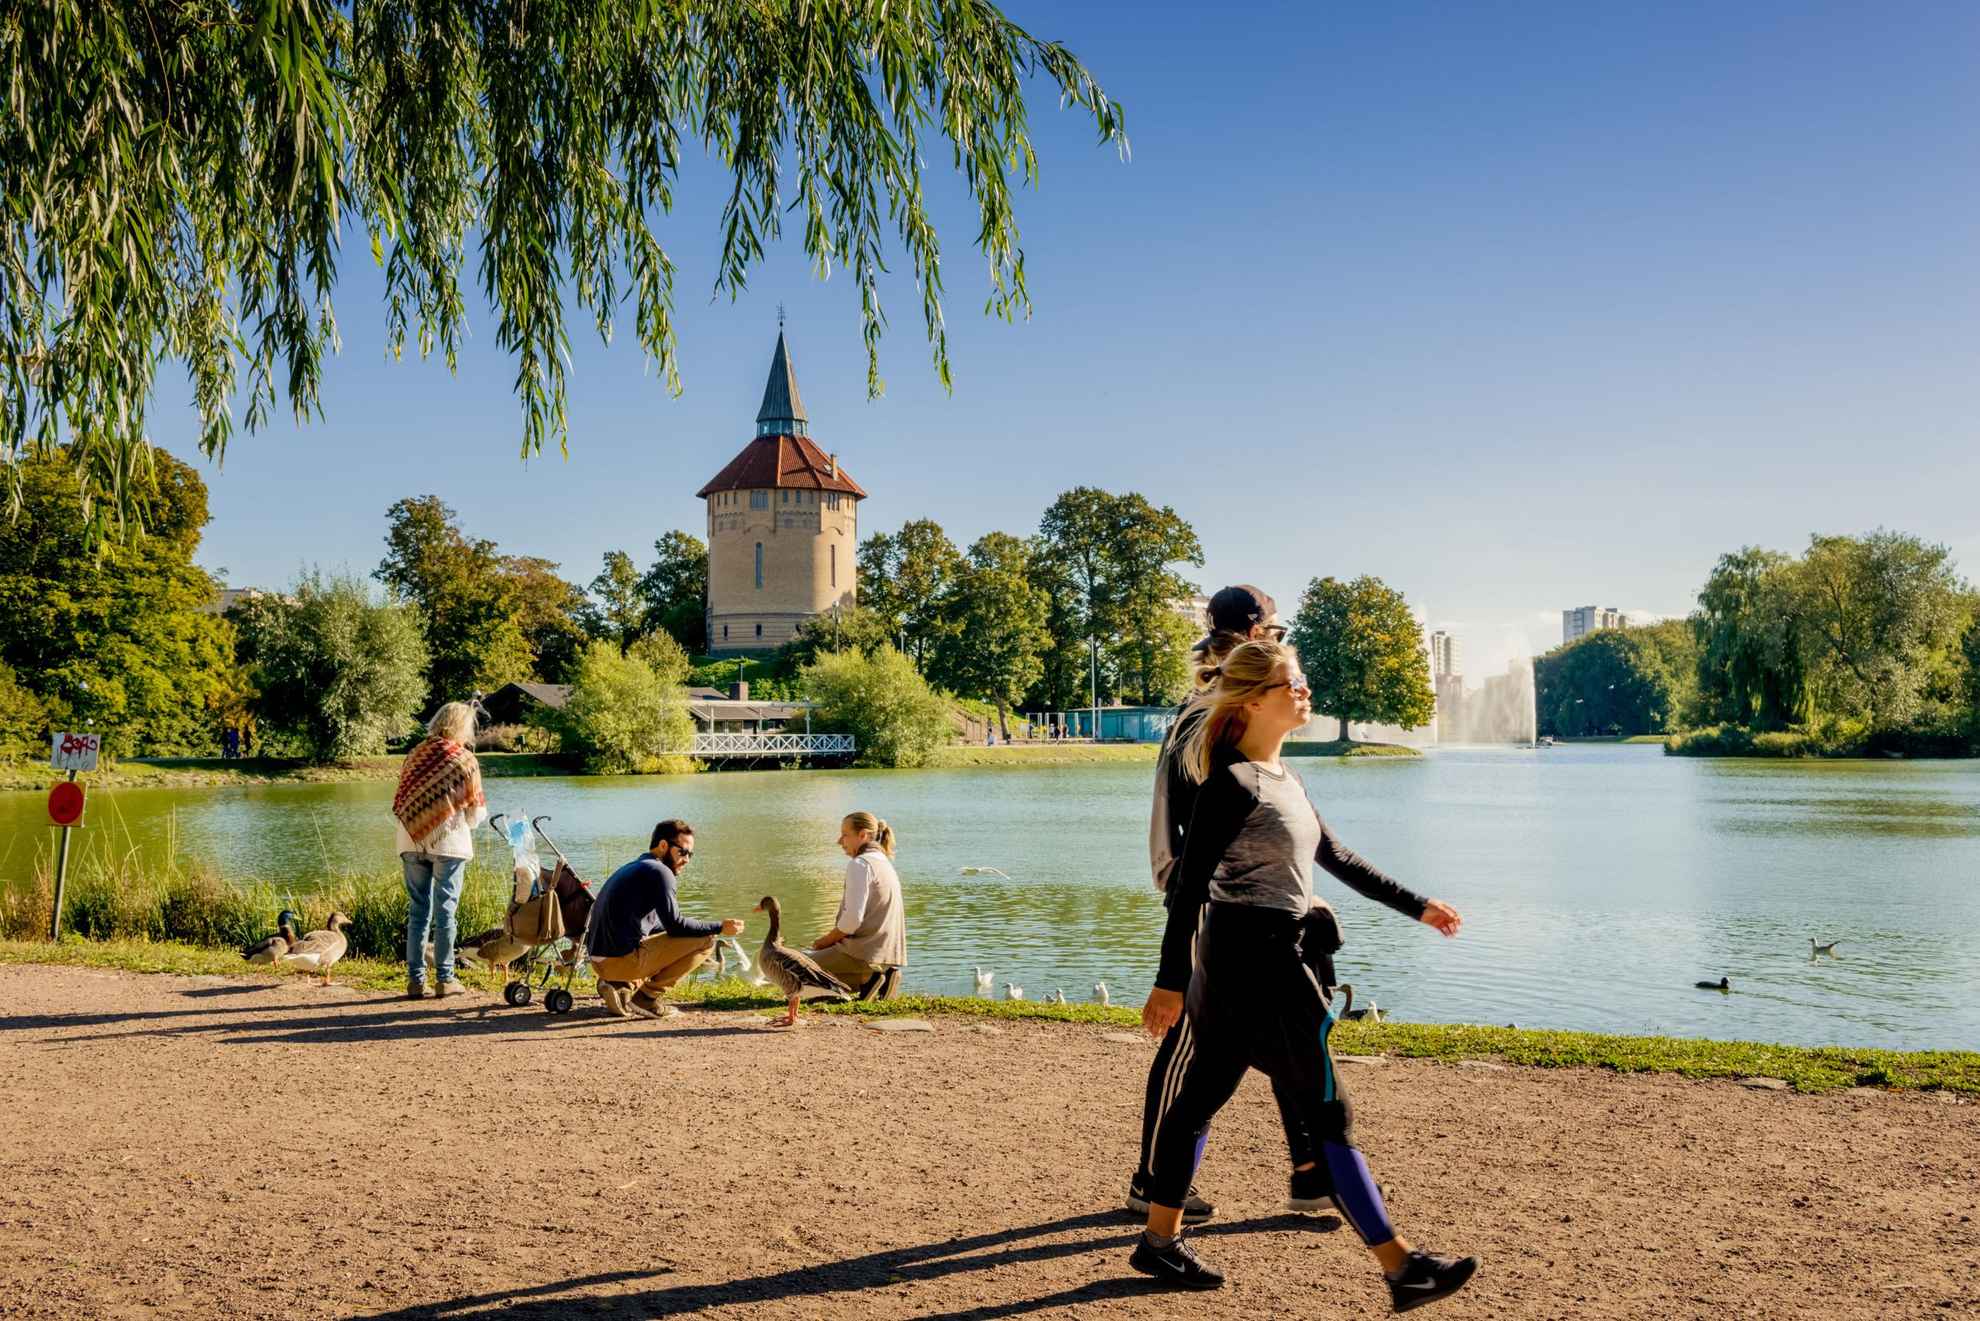 People walking on a pathway in a park. There are lush greenery and a lake behind them.